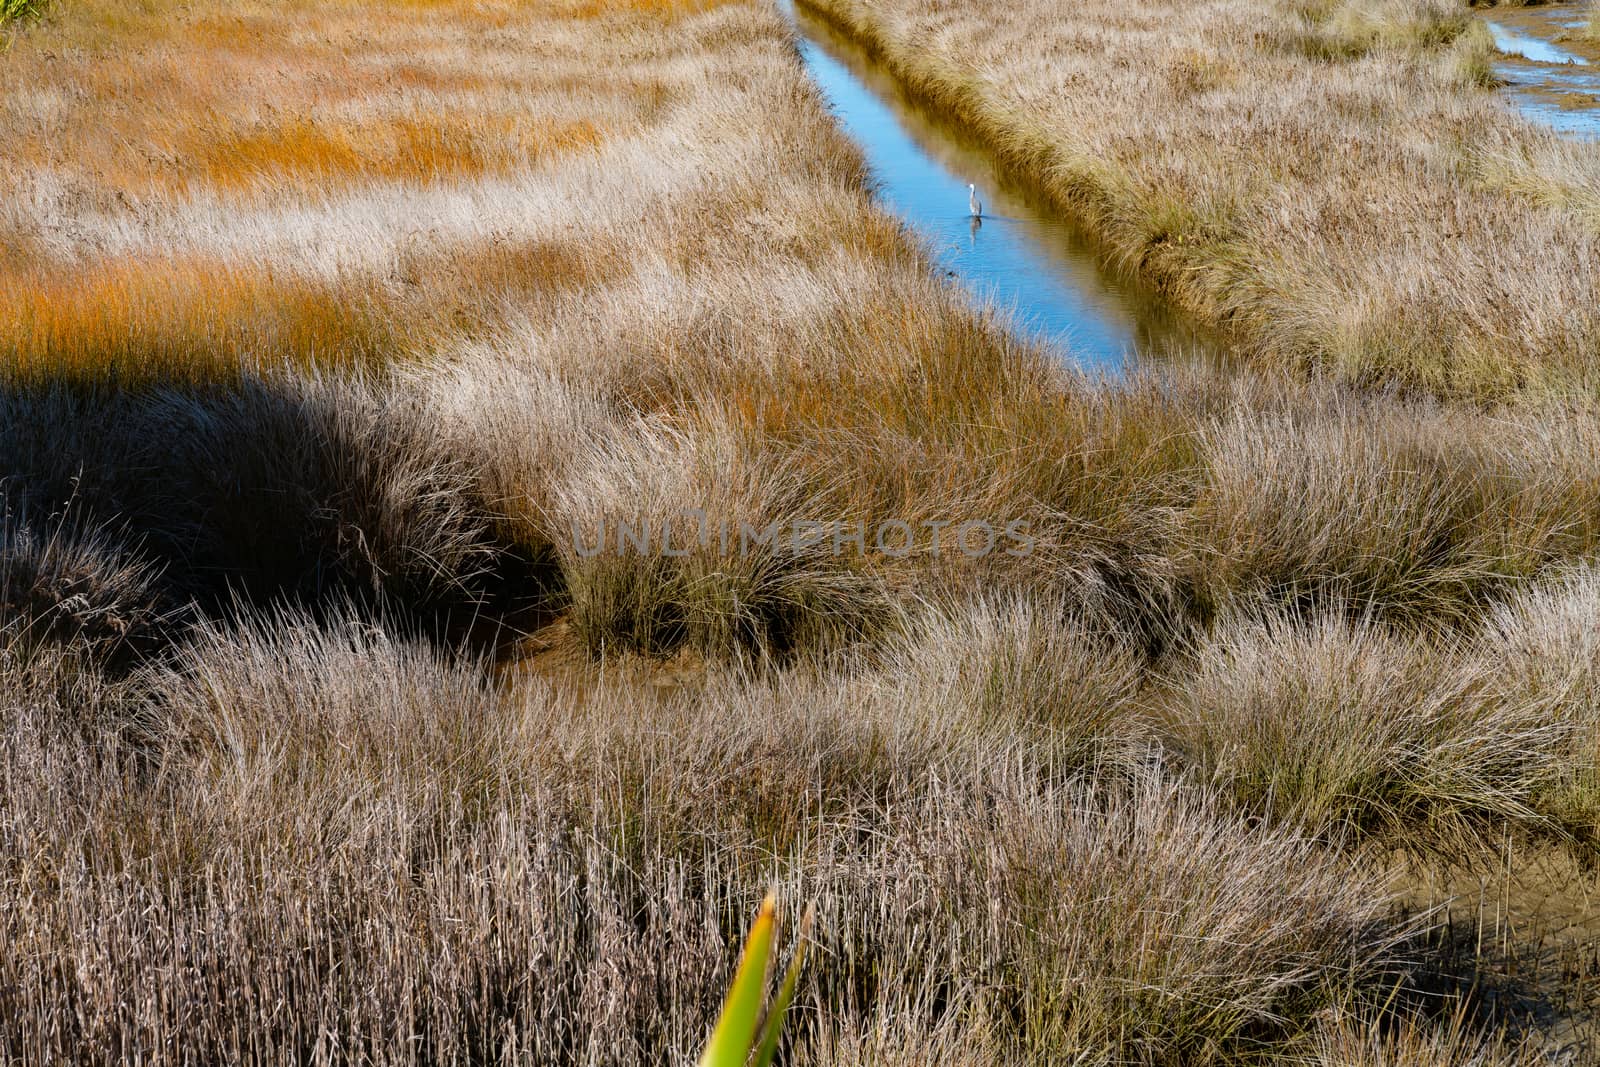 Wetland or saltmarsh with densely growing oio reed and drain with heron wading.